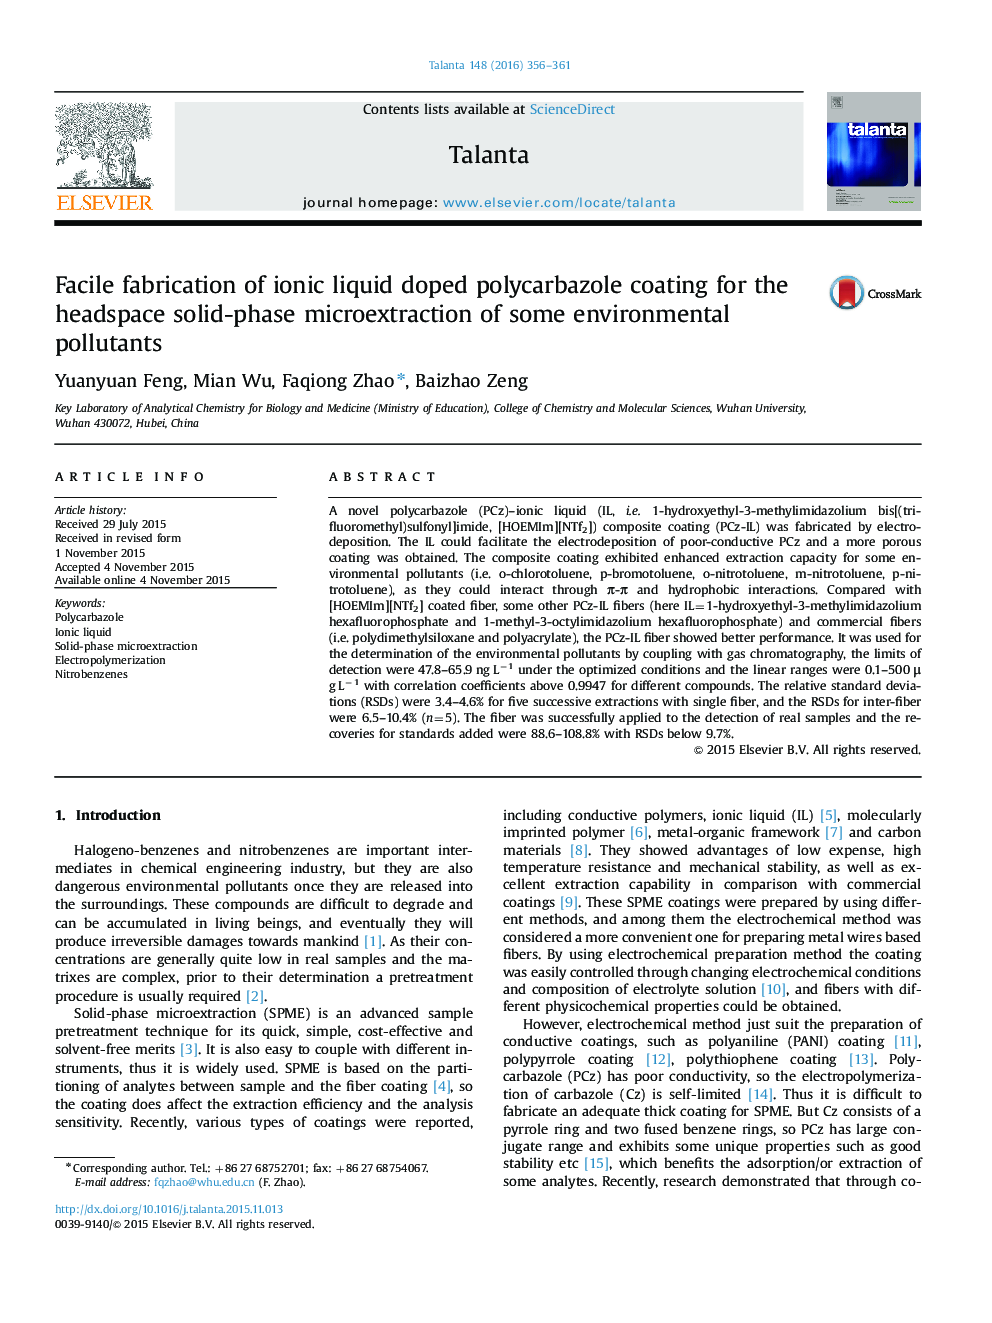 Facile fabrication of ionic liquid doped polycarbazole coating for the headspace solid-phase microextraction of some environmental pollutants